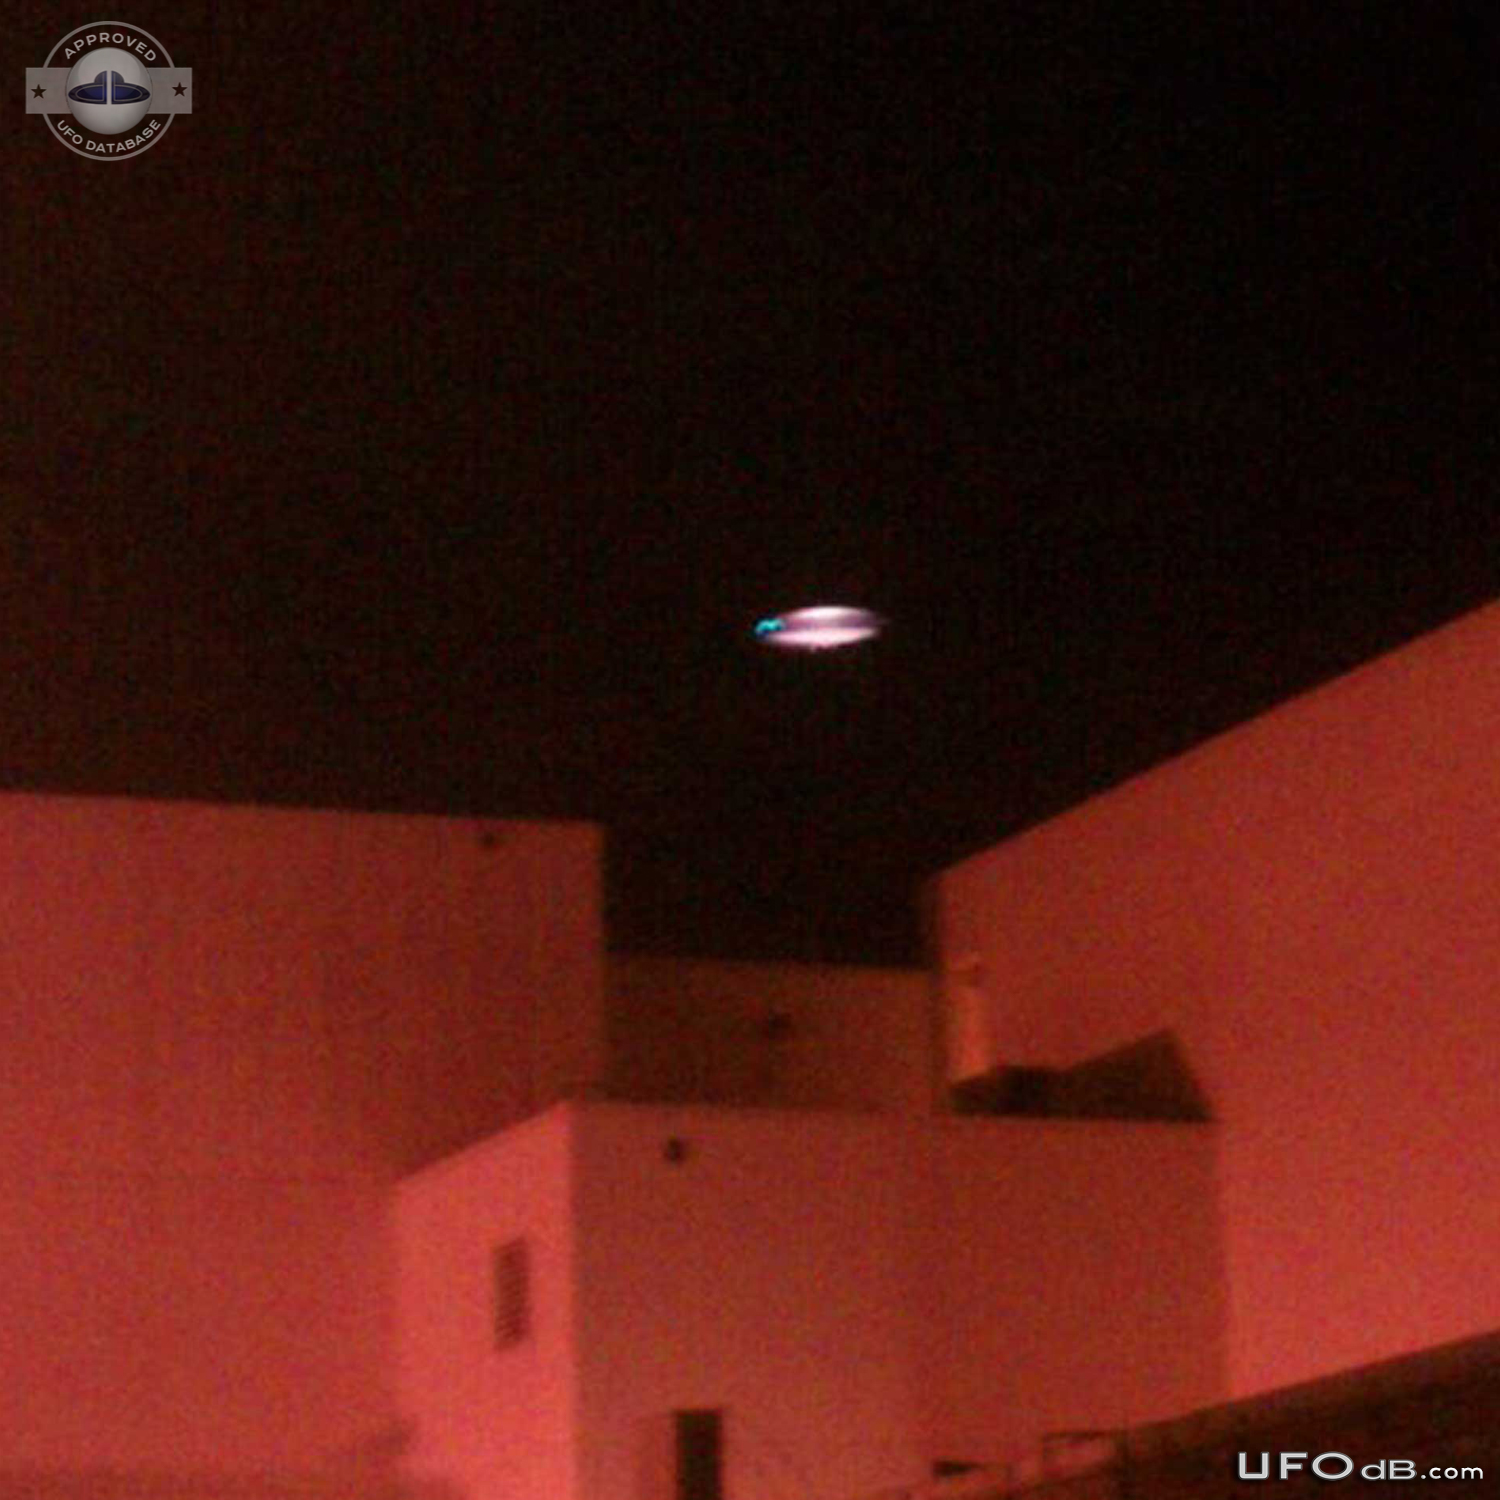 Clear Picture of UFO taken in the night Los Angeles, California | 2012 UFO Picture #397-1